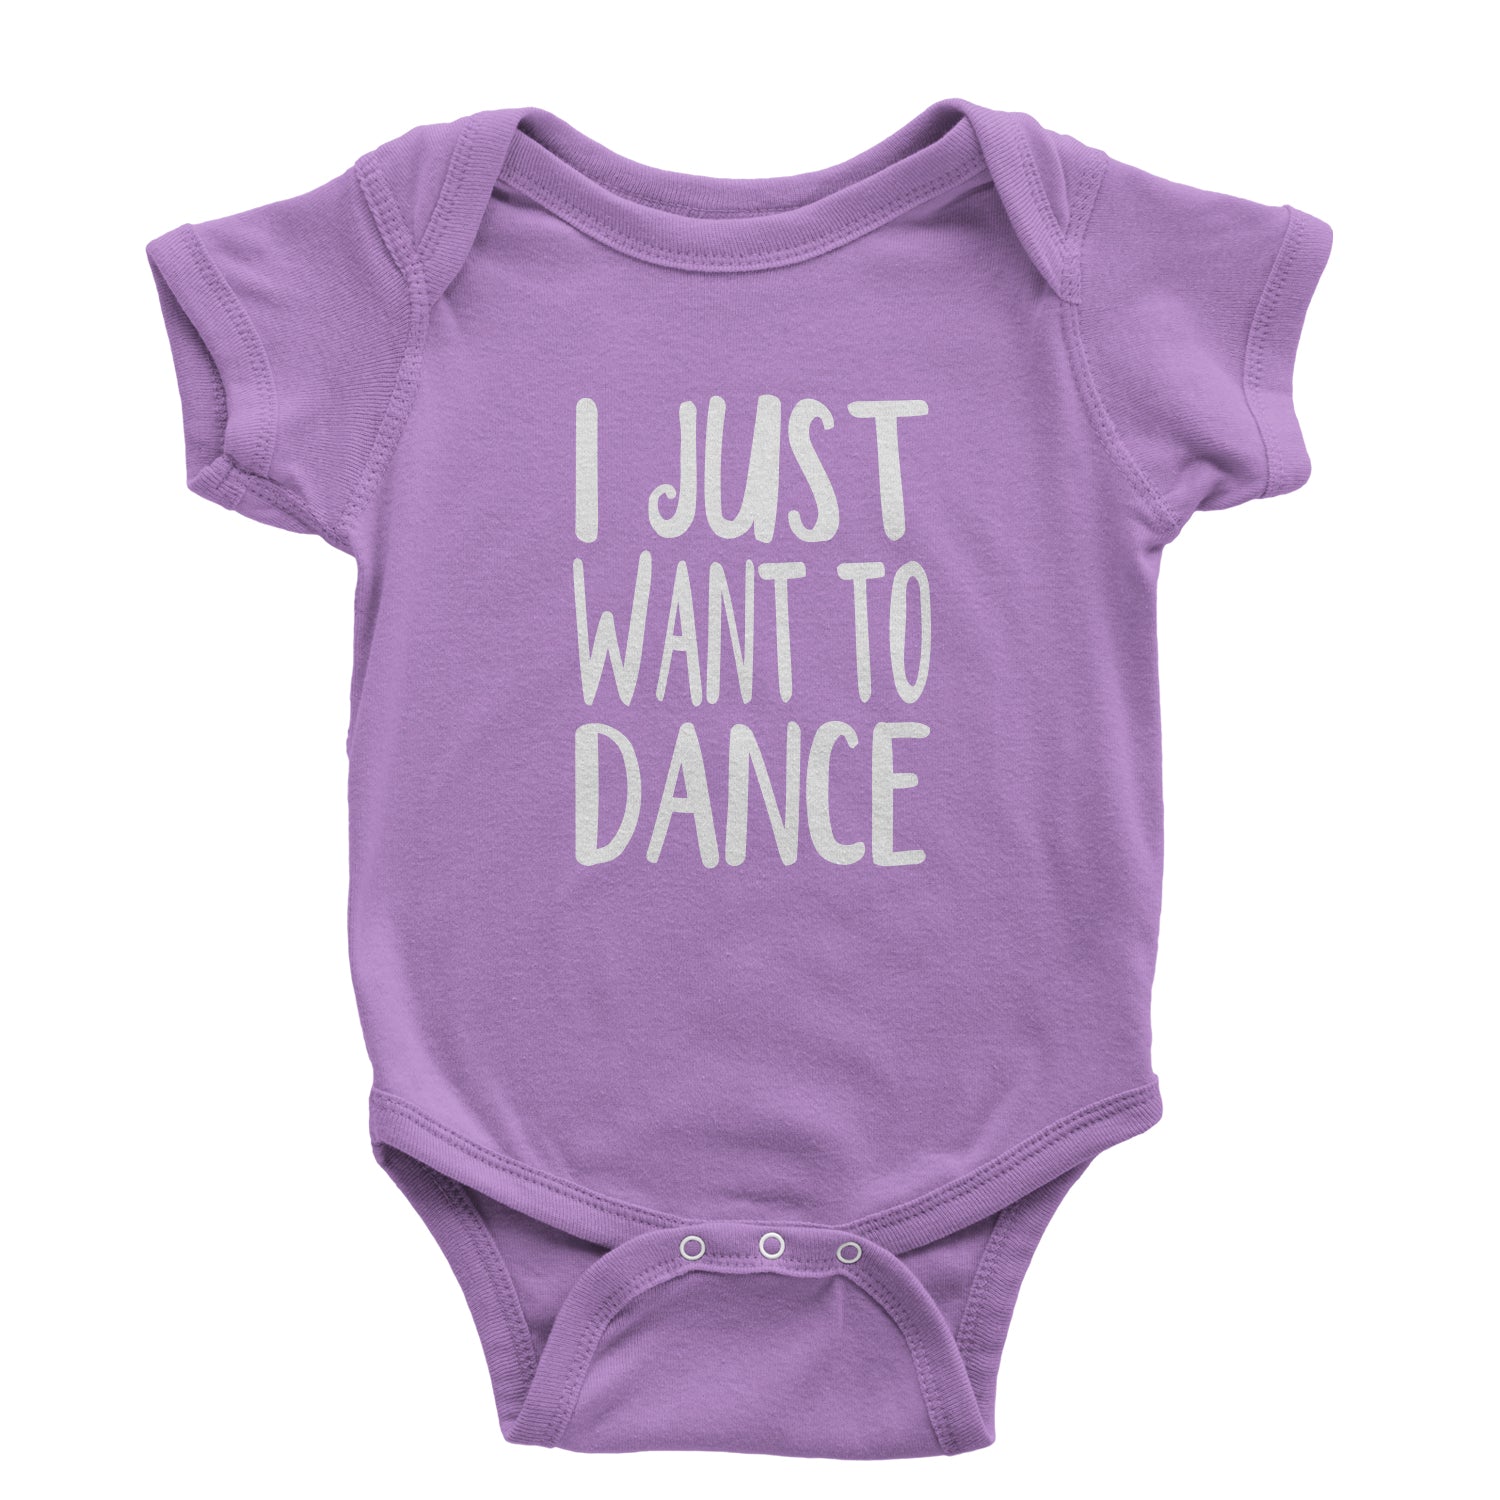 I Just Want To Dance Infant One-Piece Romper Bodysuit boomerang, dancing, jo, jojo by Expression Tees